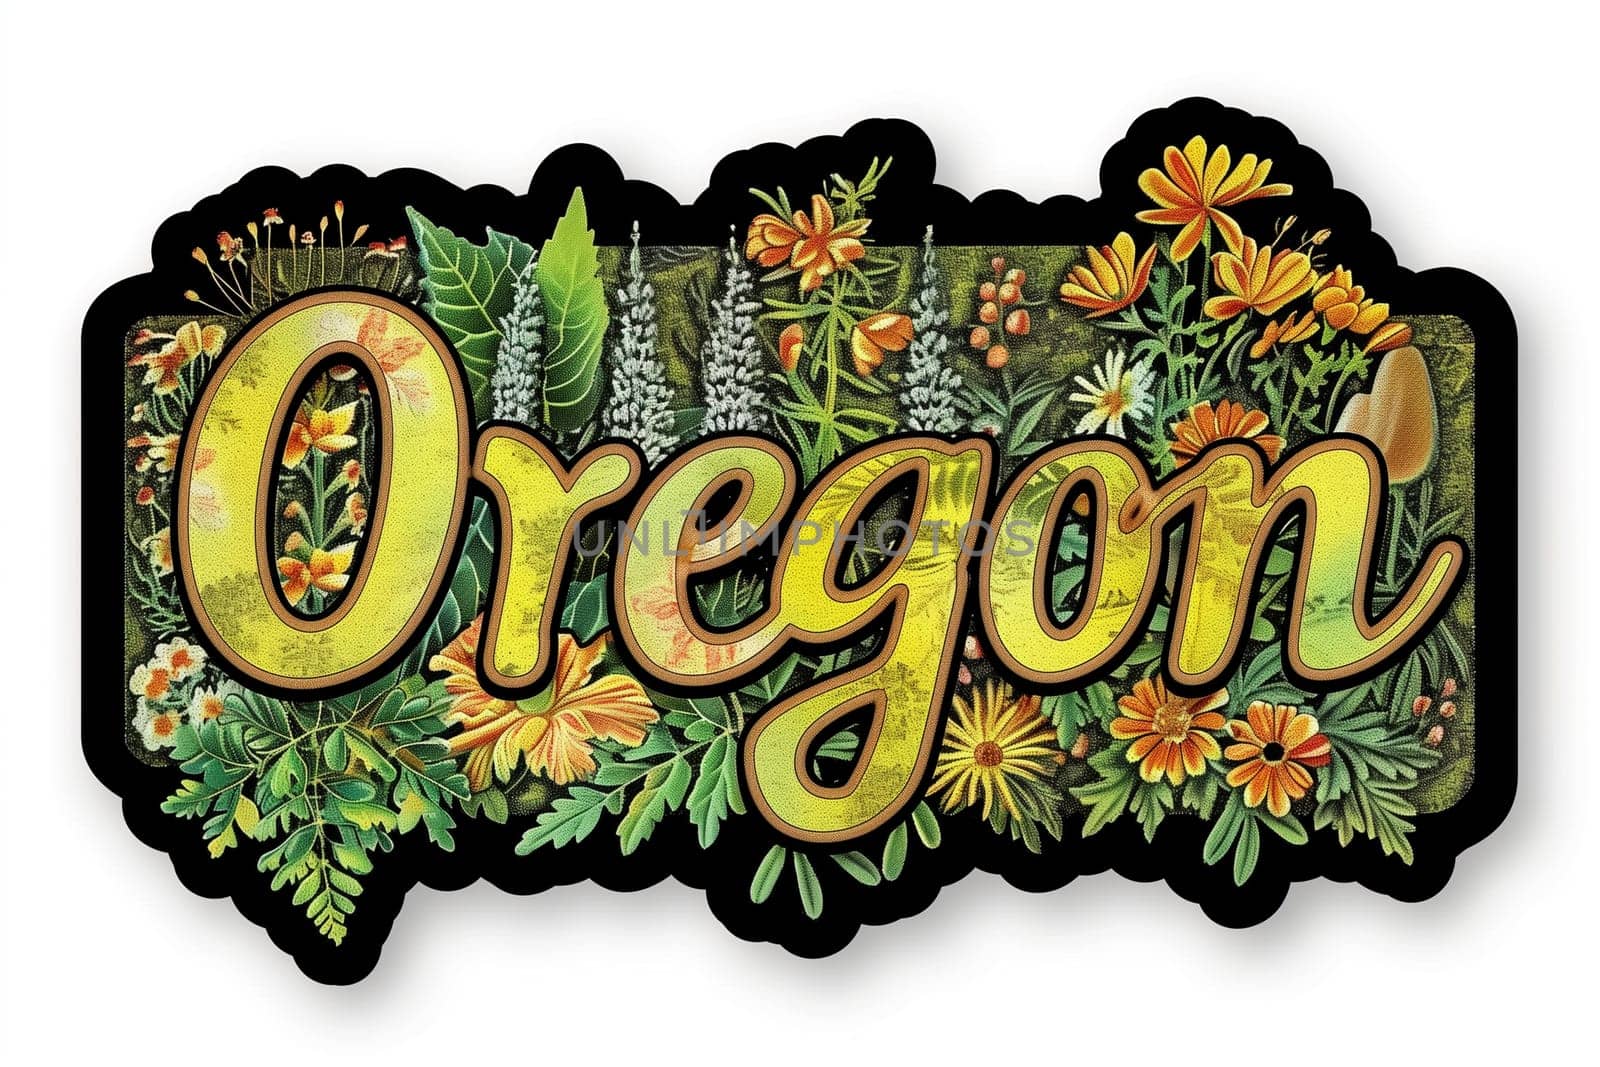 Oregon Sign Adorned With Flowers and Plants by Sd28DimoN_1976